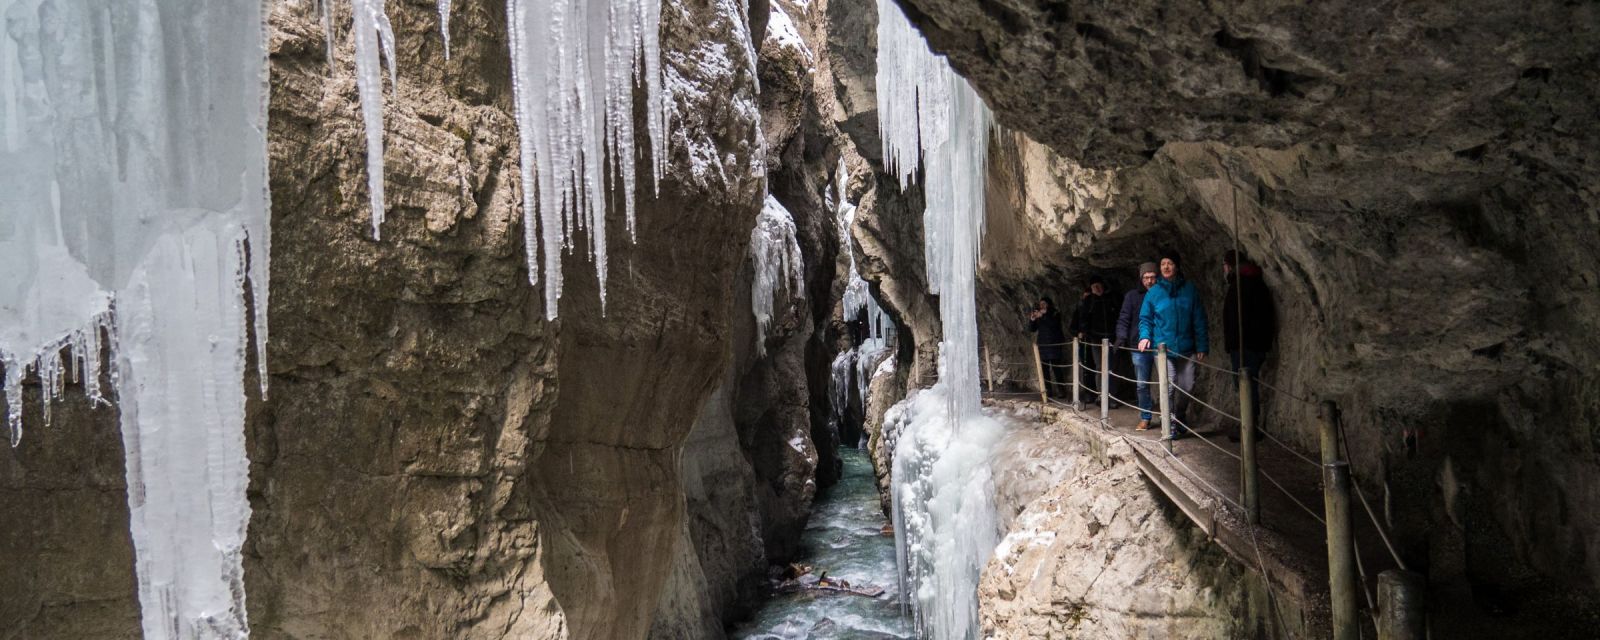 Partnachklamm in winter with icicles